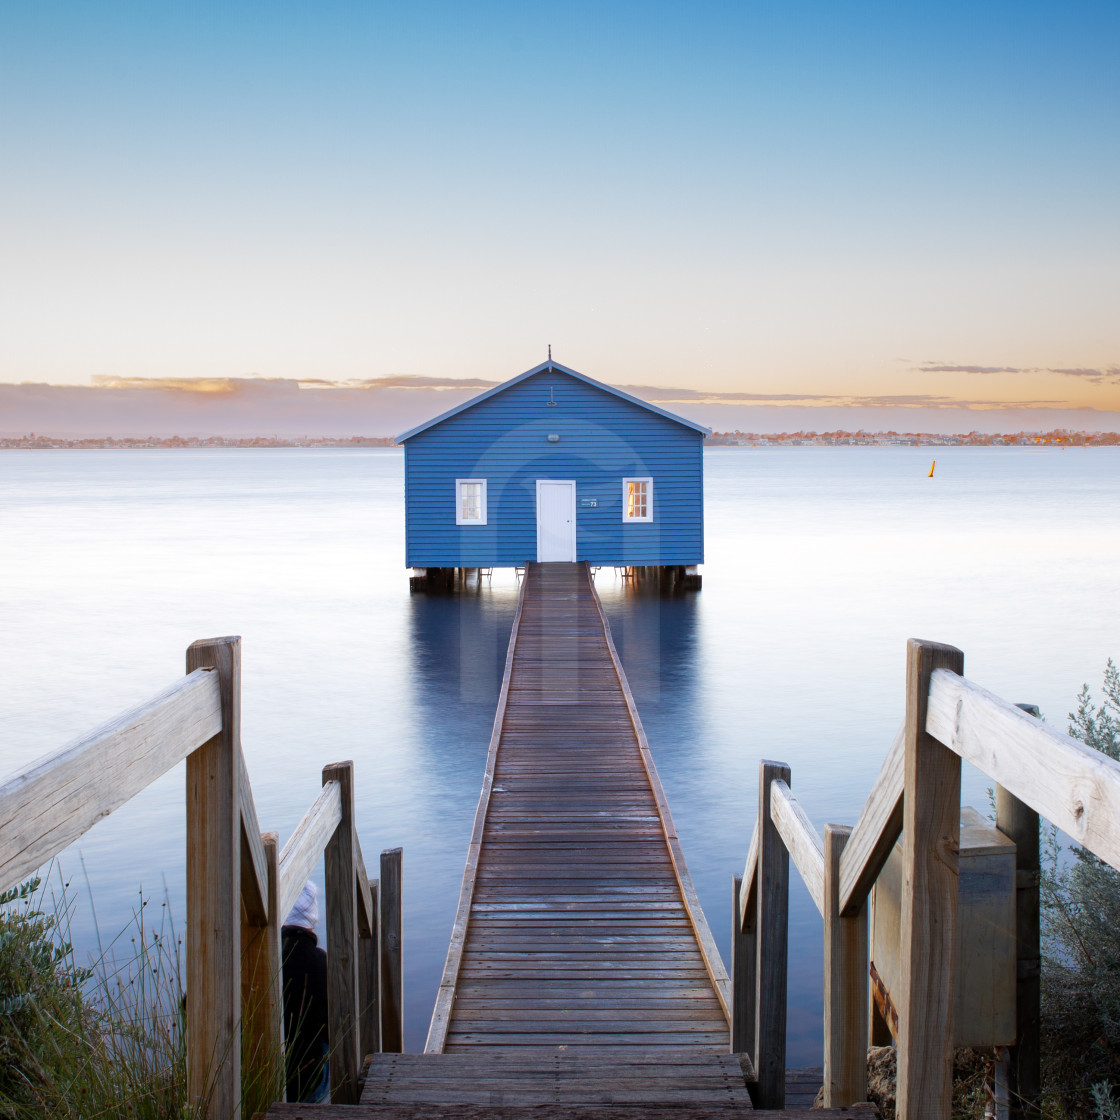 "Blue Boat Shed" stock image